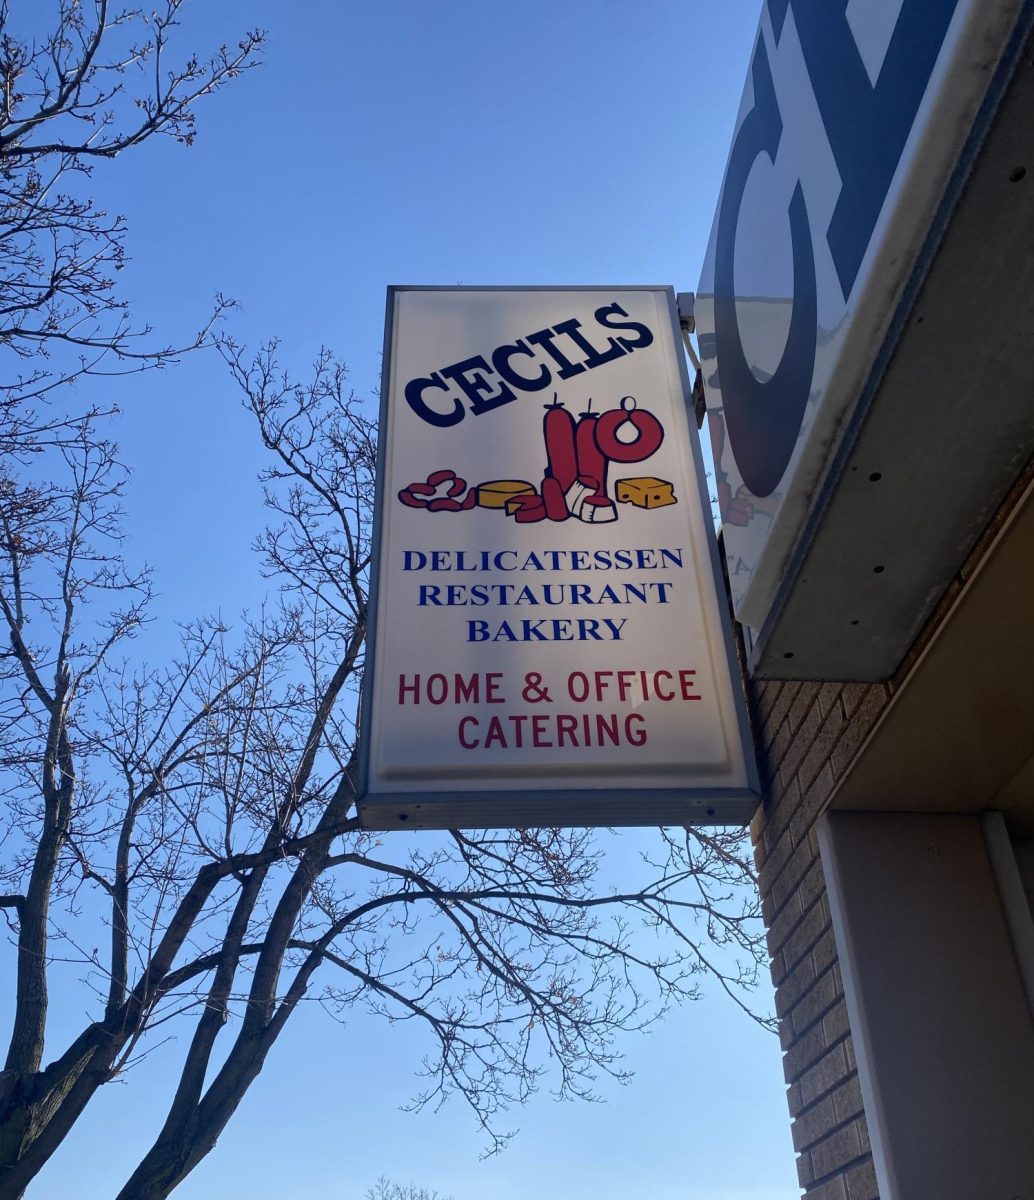 COMMUNITY STAPLE. Cecils Deli has been a part of the Highland Park community for over 70 years.